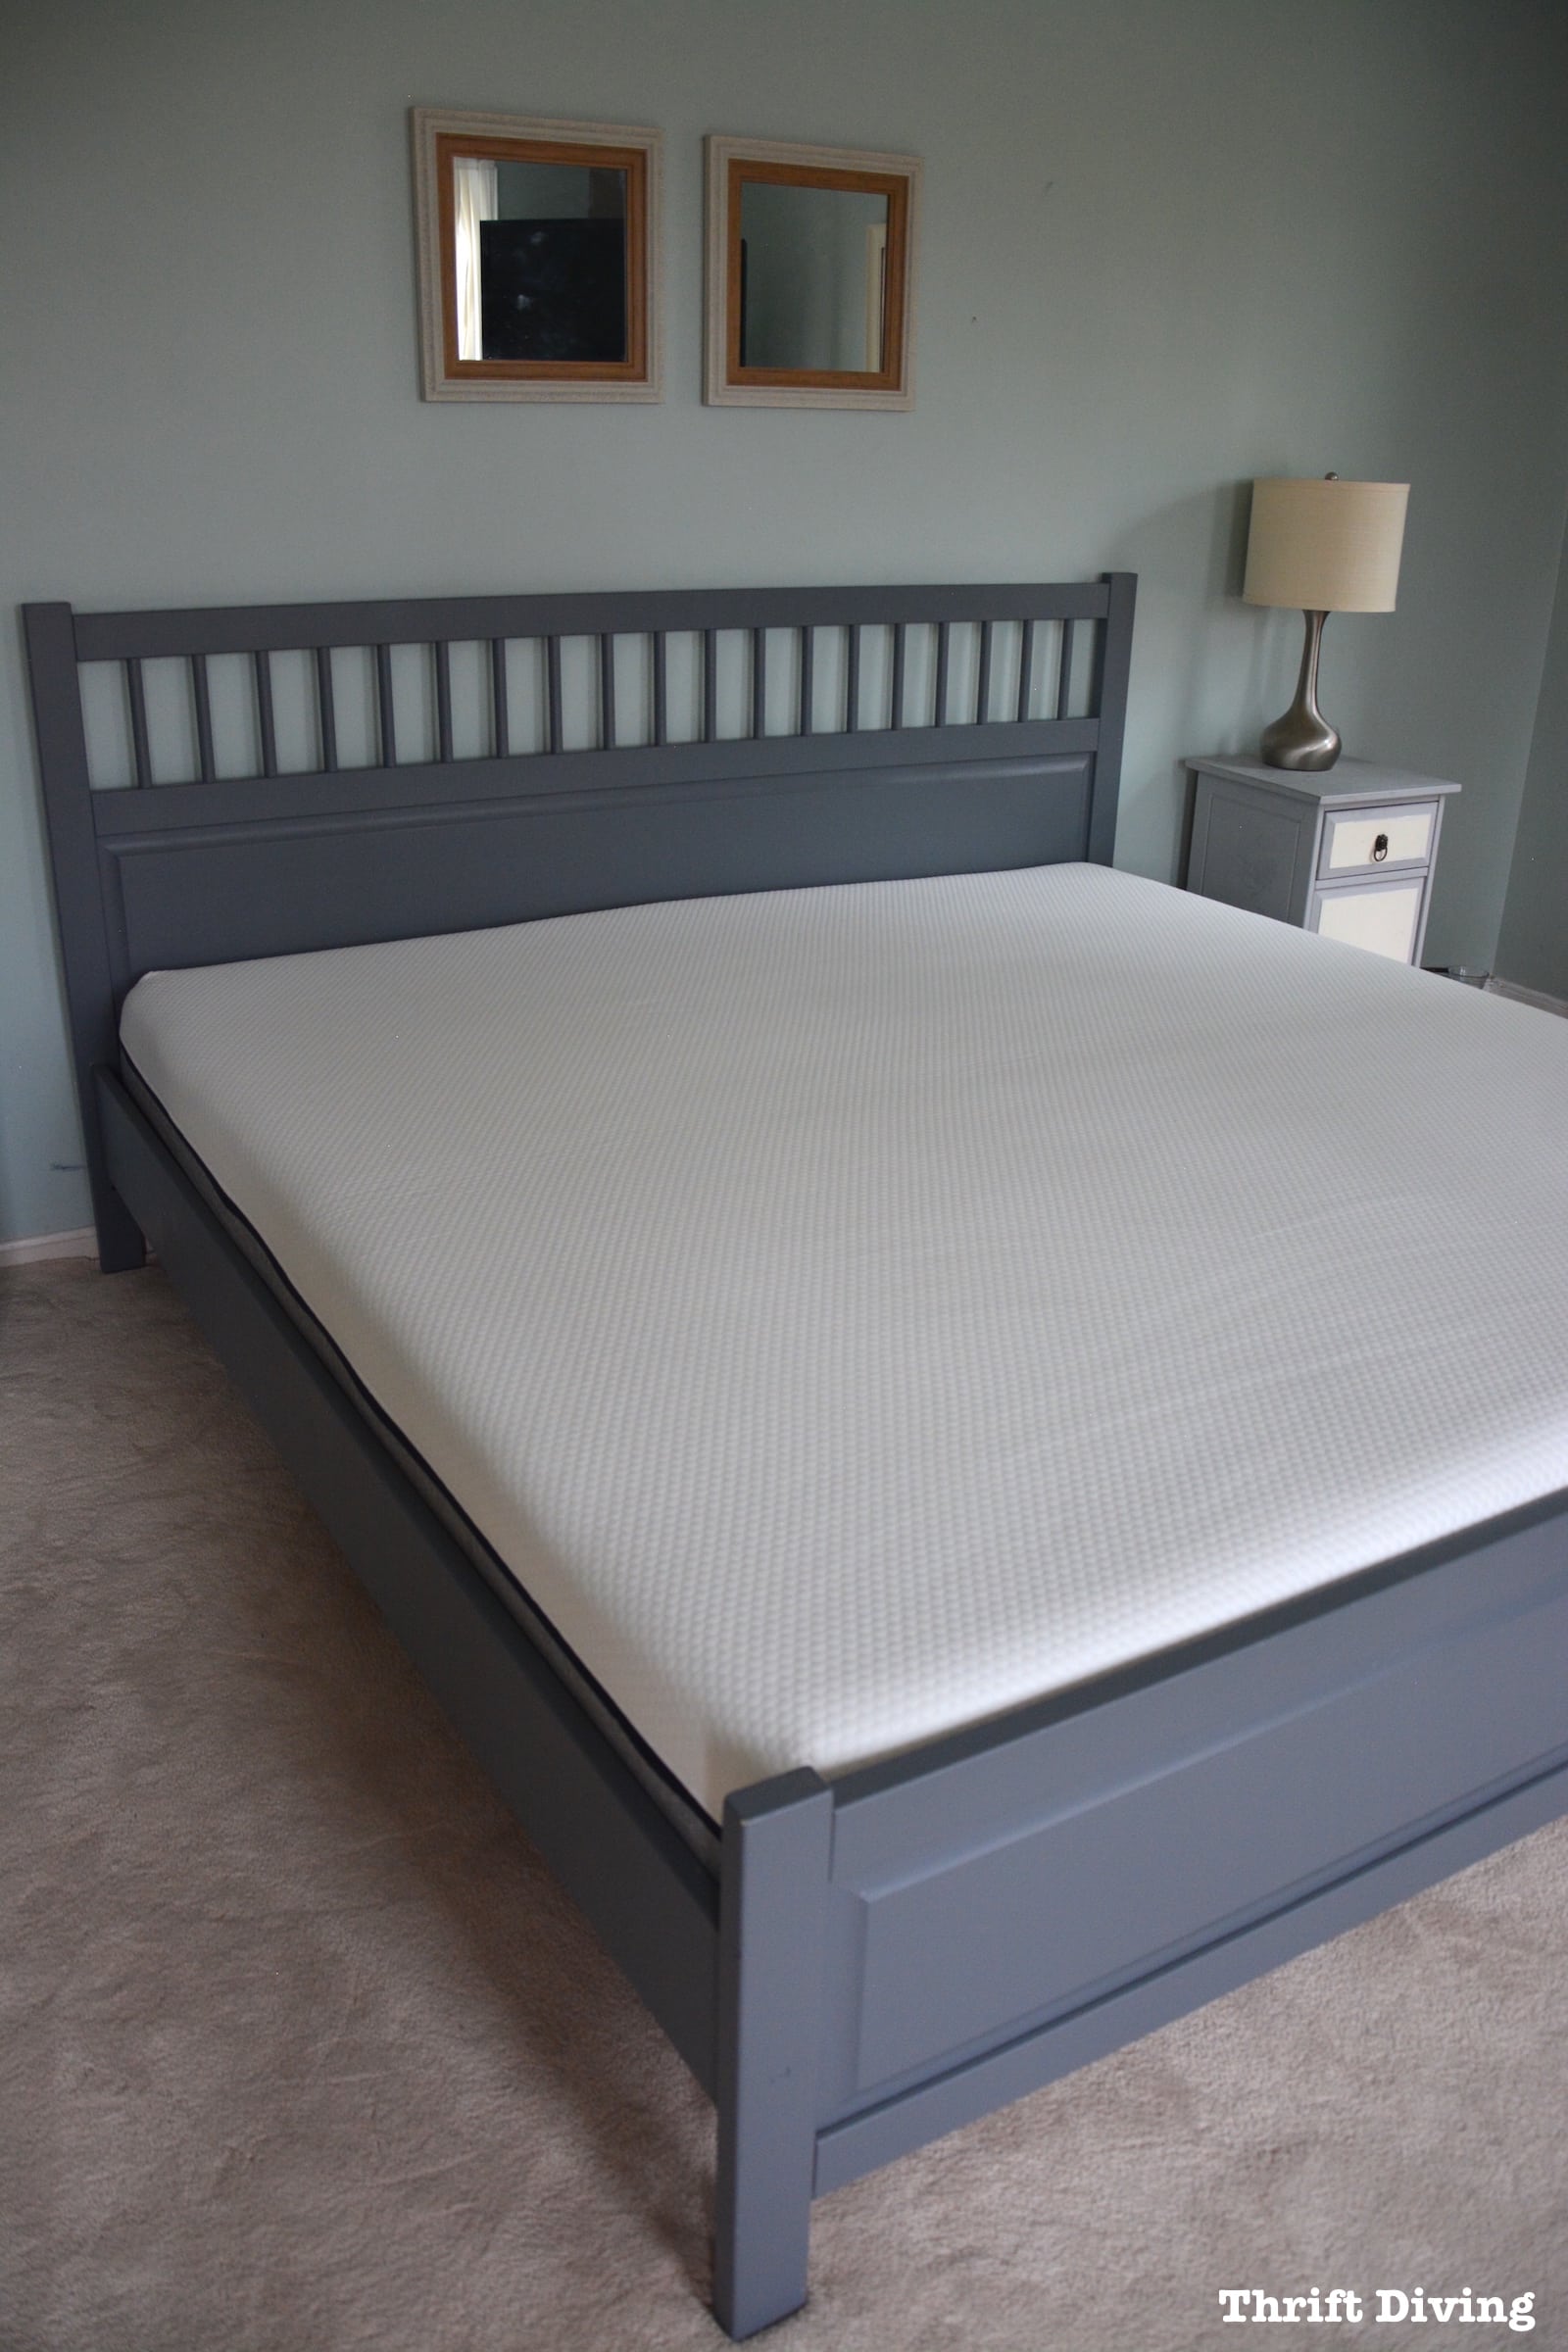 Lull Mattress Review and painted IKEA bed frame - AFTER - Thrift Diving